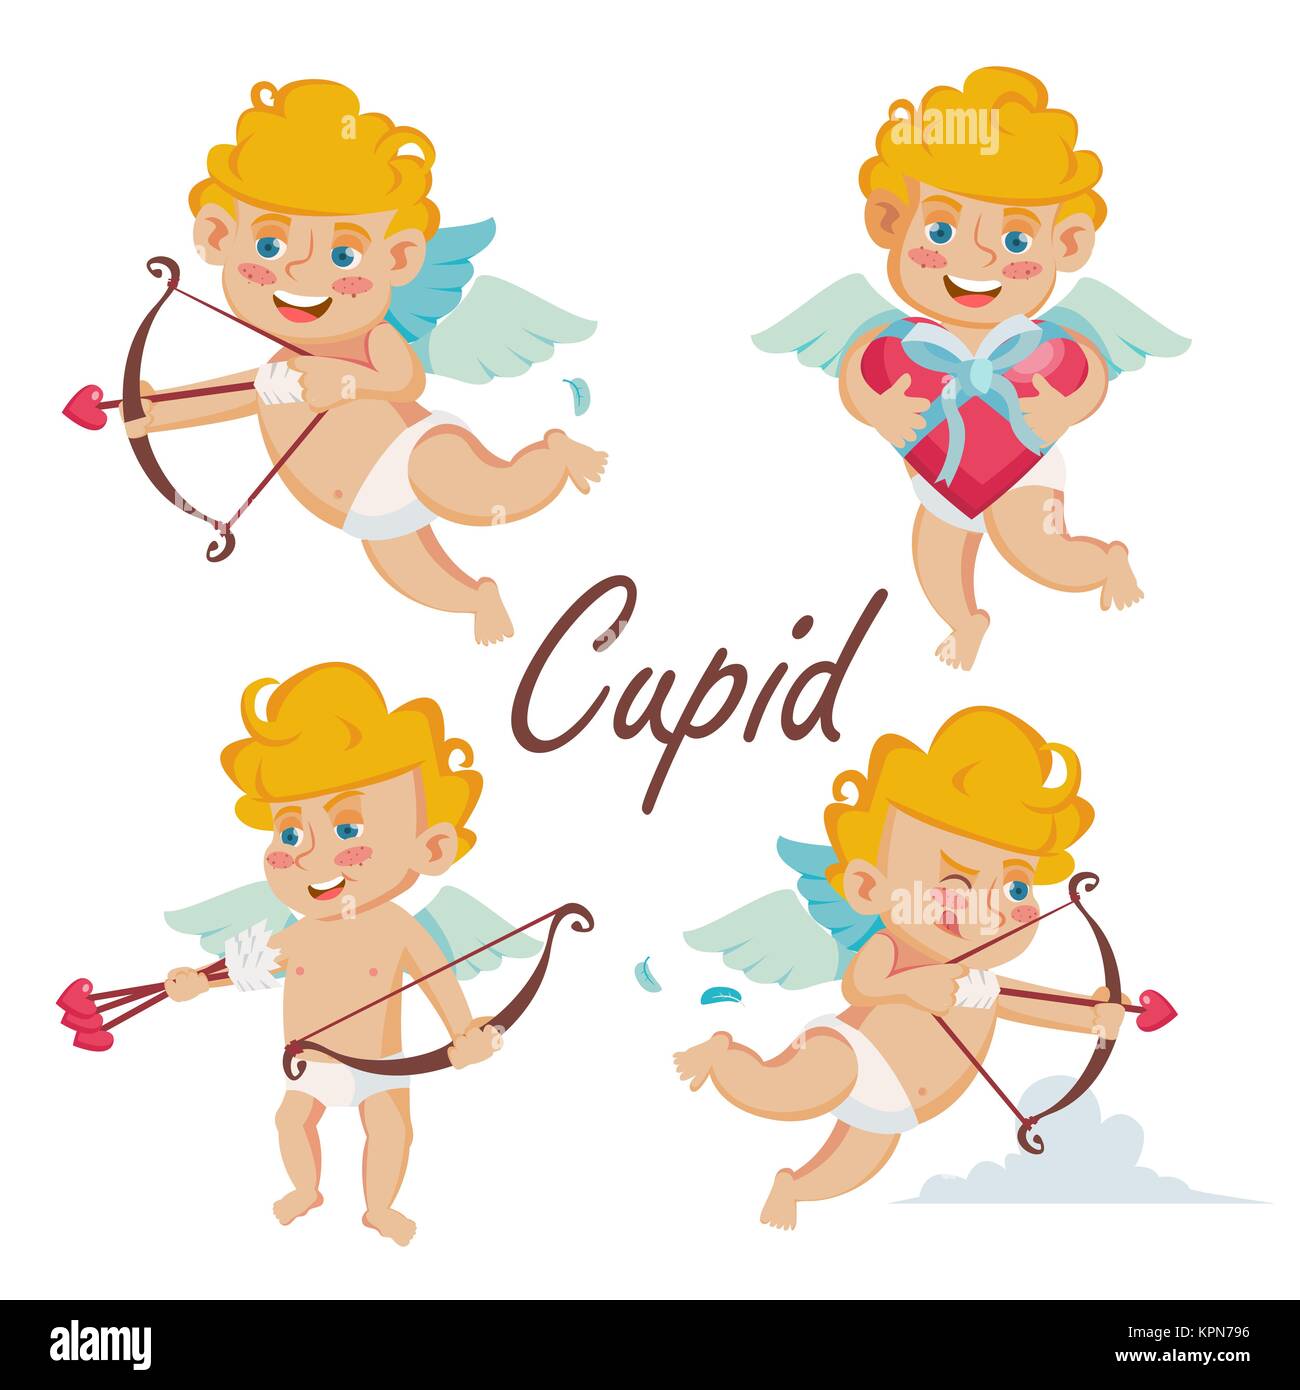 Cupid Set Vector. Cupids Bow. Cupid In Different Poses. Happy Valentine s Day. Element For Graphic Design. Isolated Flat Cartoon Character Illustration Stock Vector